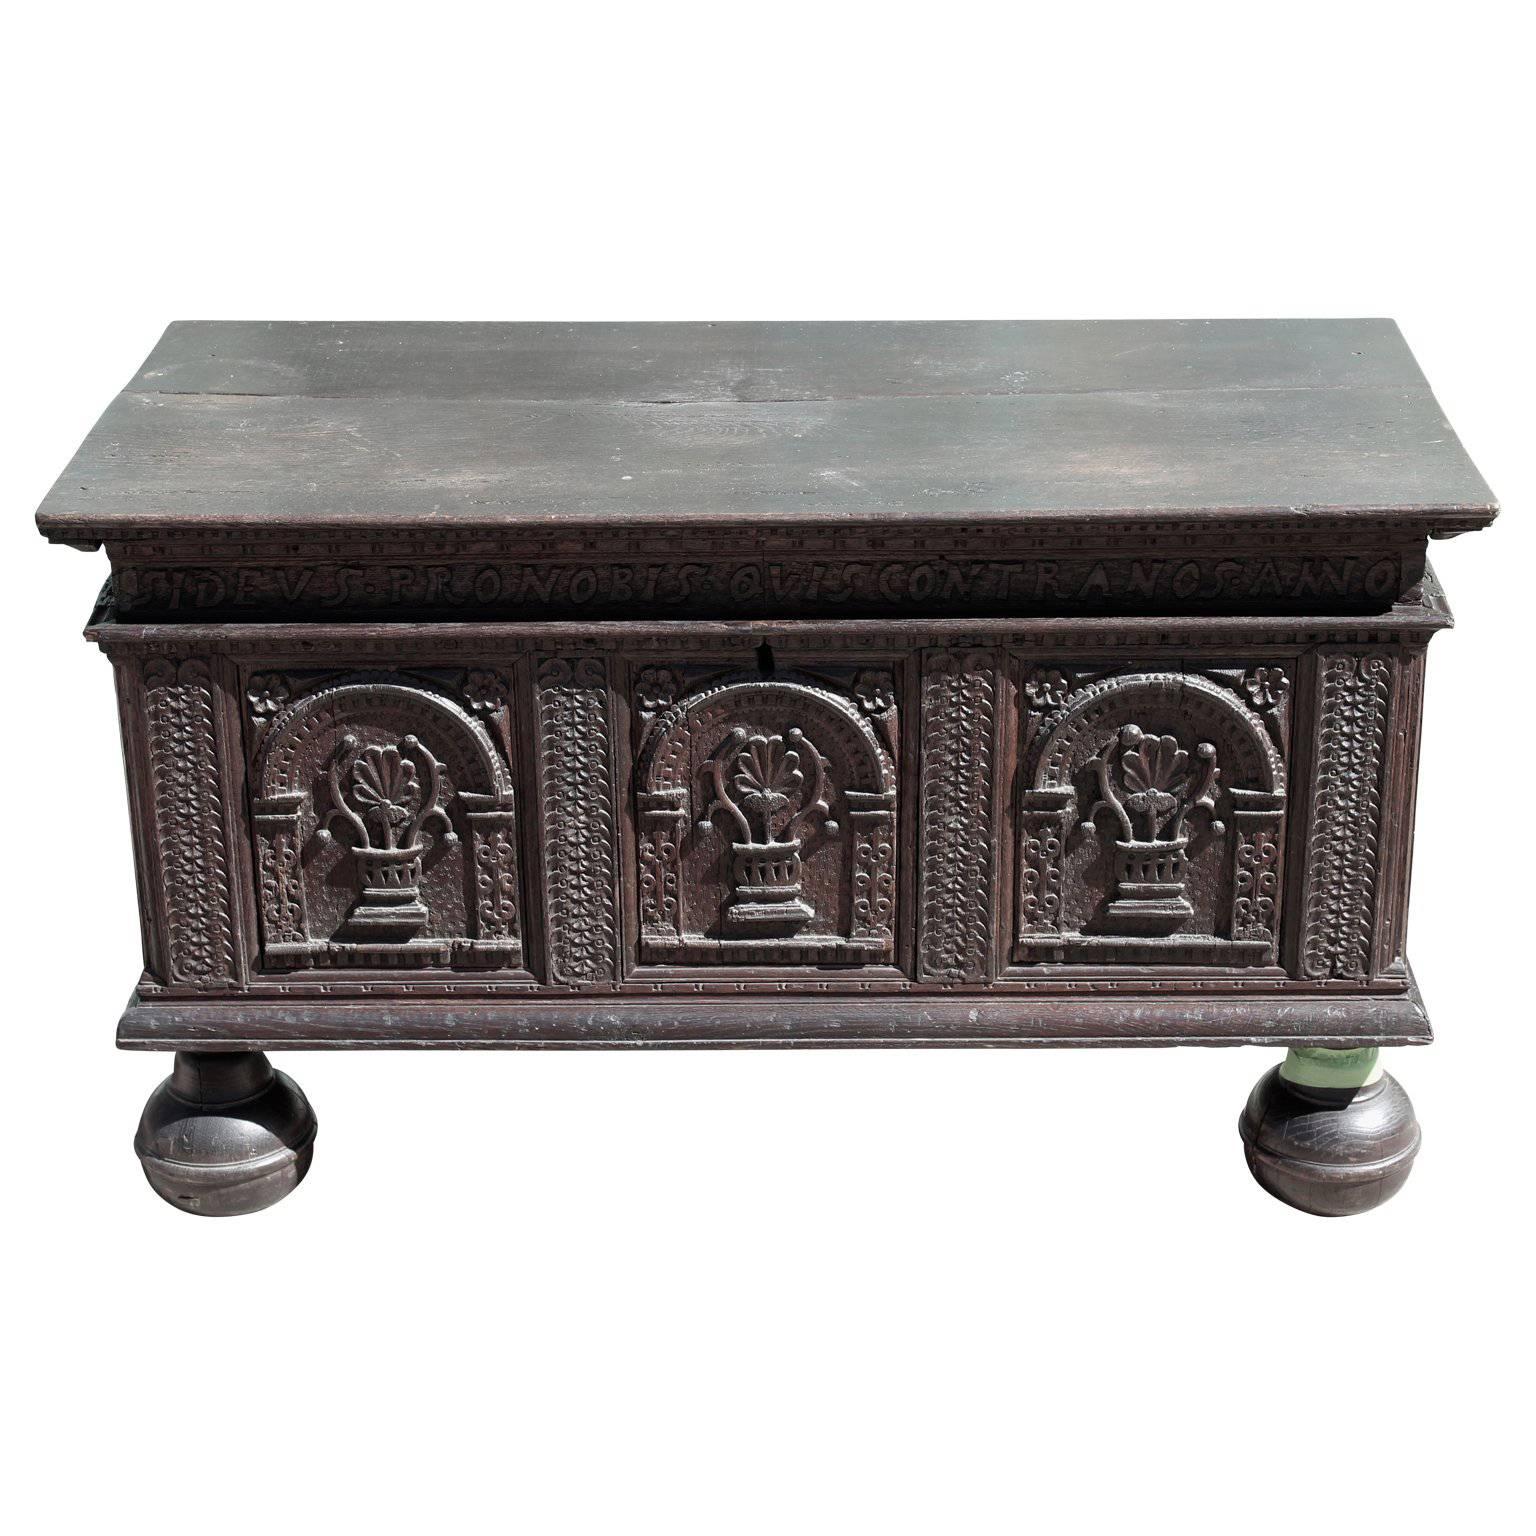 Unique oak colonial chest with bun feet and Latin engravings all the way around. Designed with groove construction. 17th century, Europe.